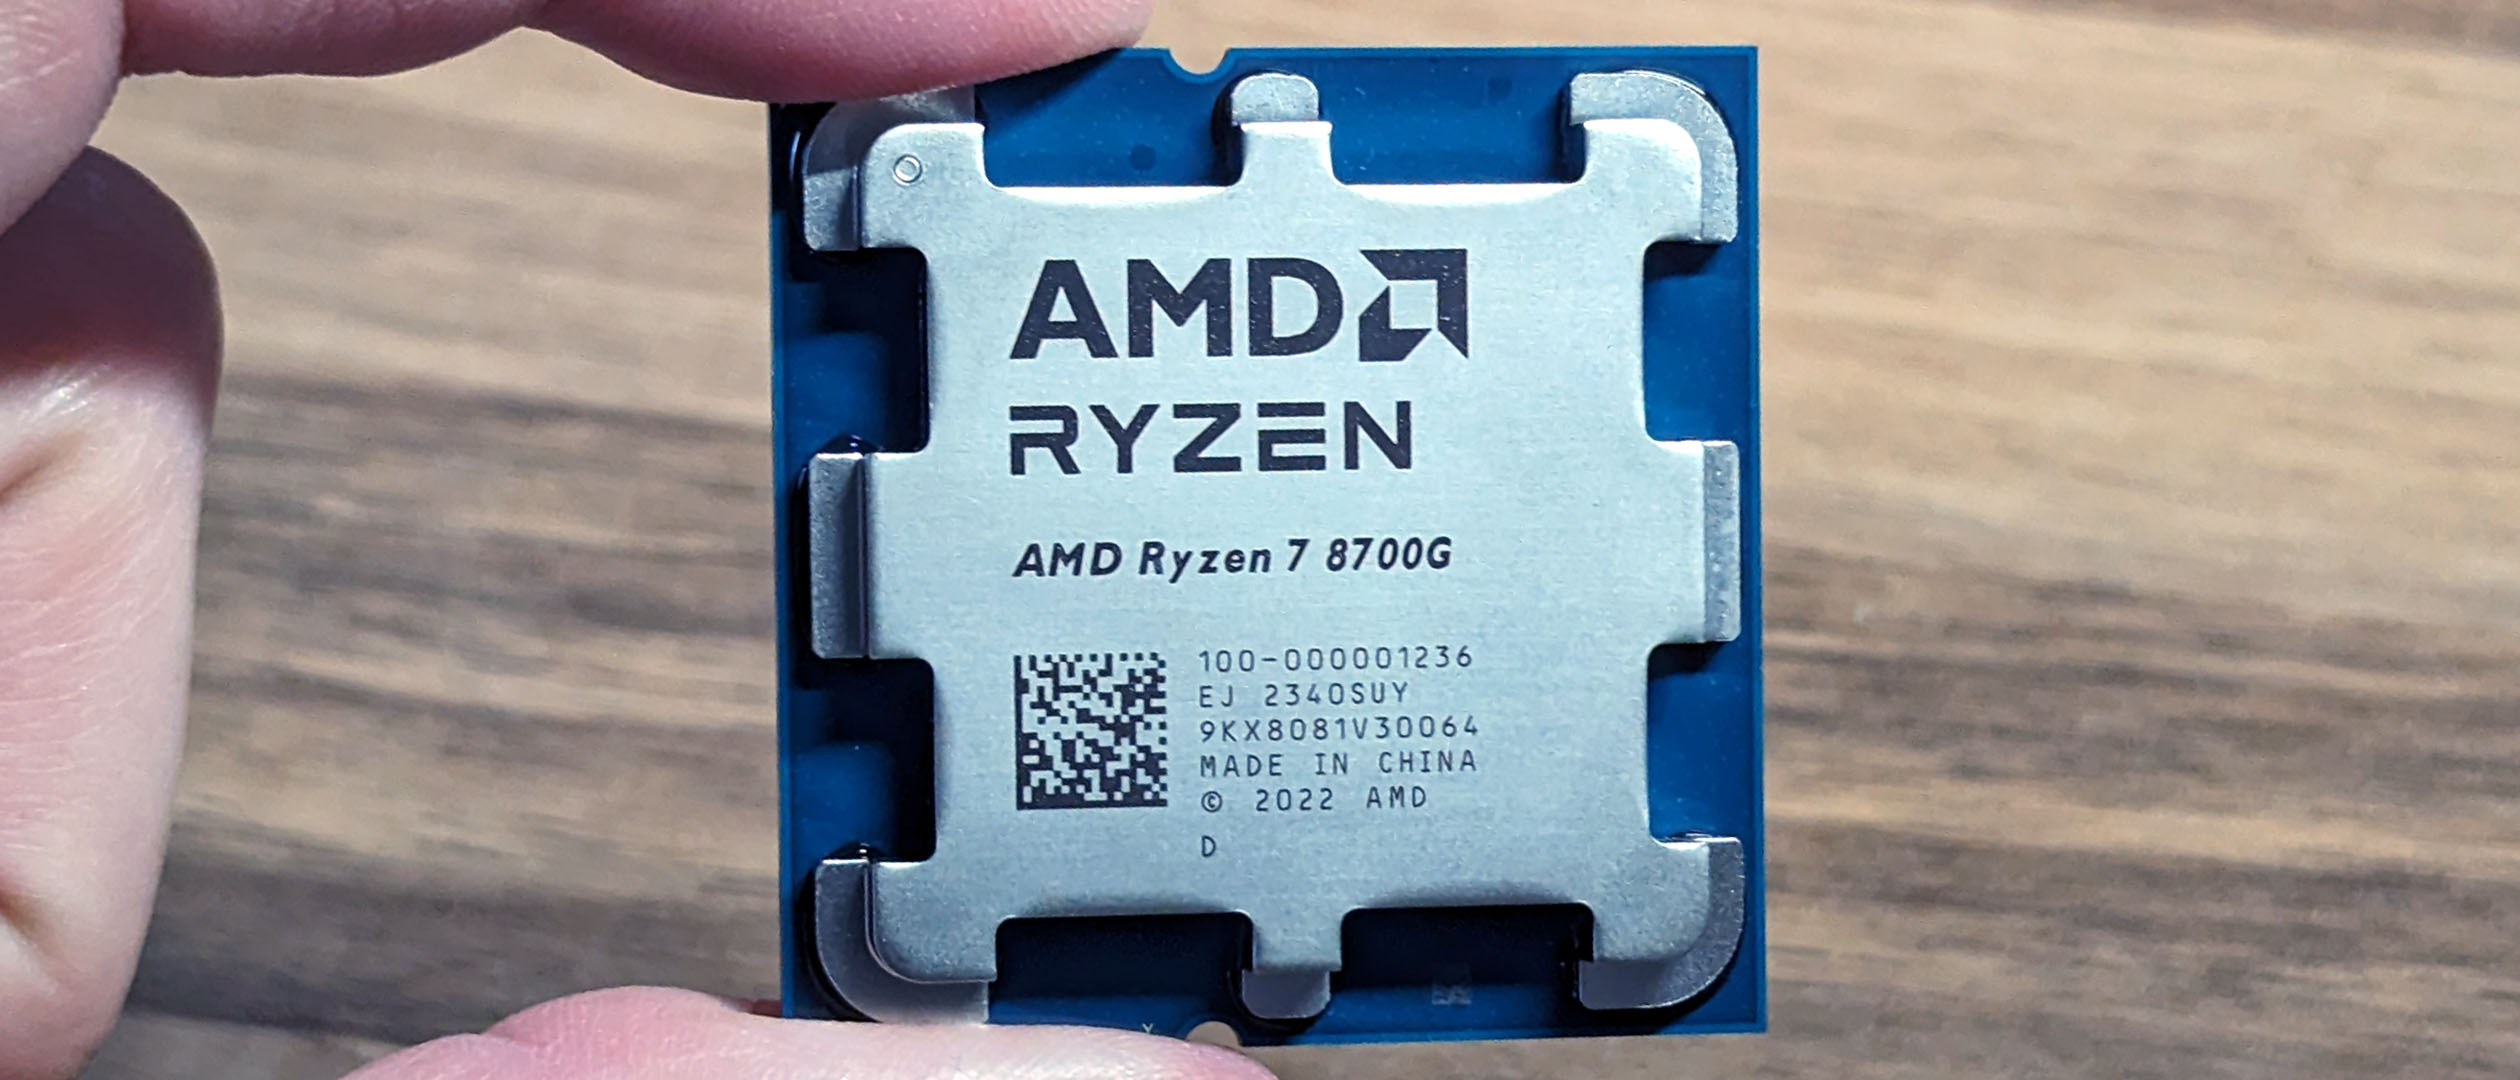 AMD Ryzen 7 8700G review: The best choice for budget PC gaming 